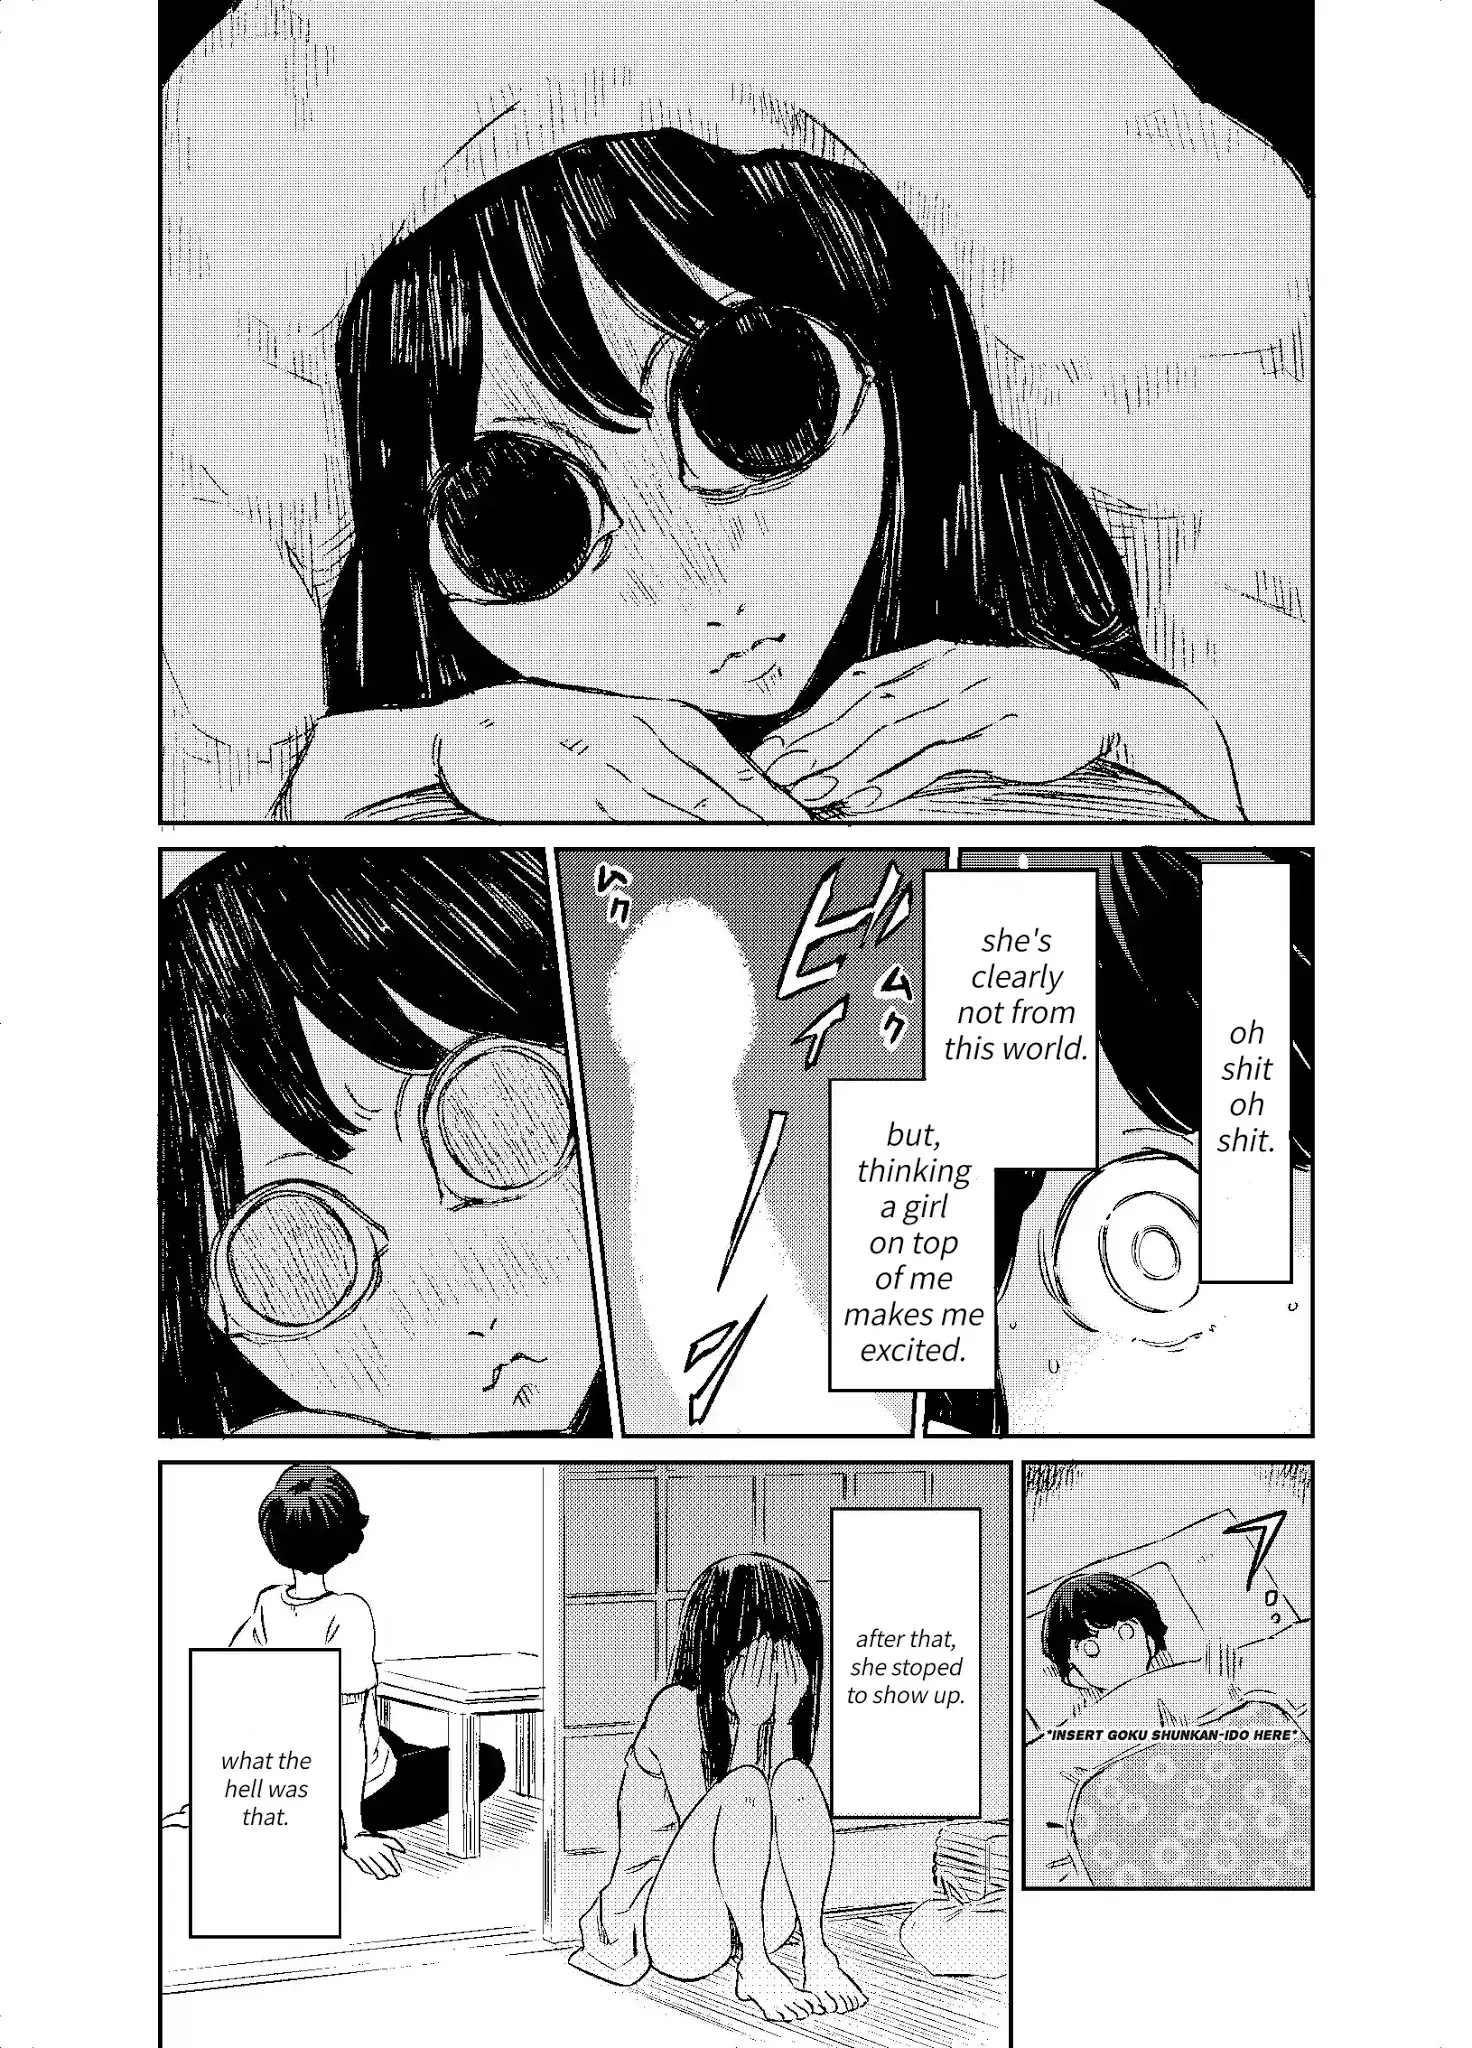 My Roommate Isn't From This World - 1 page 2